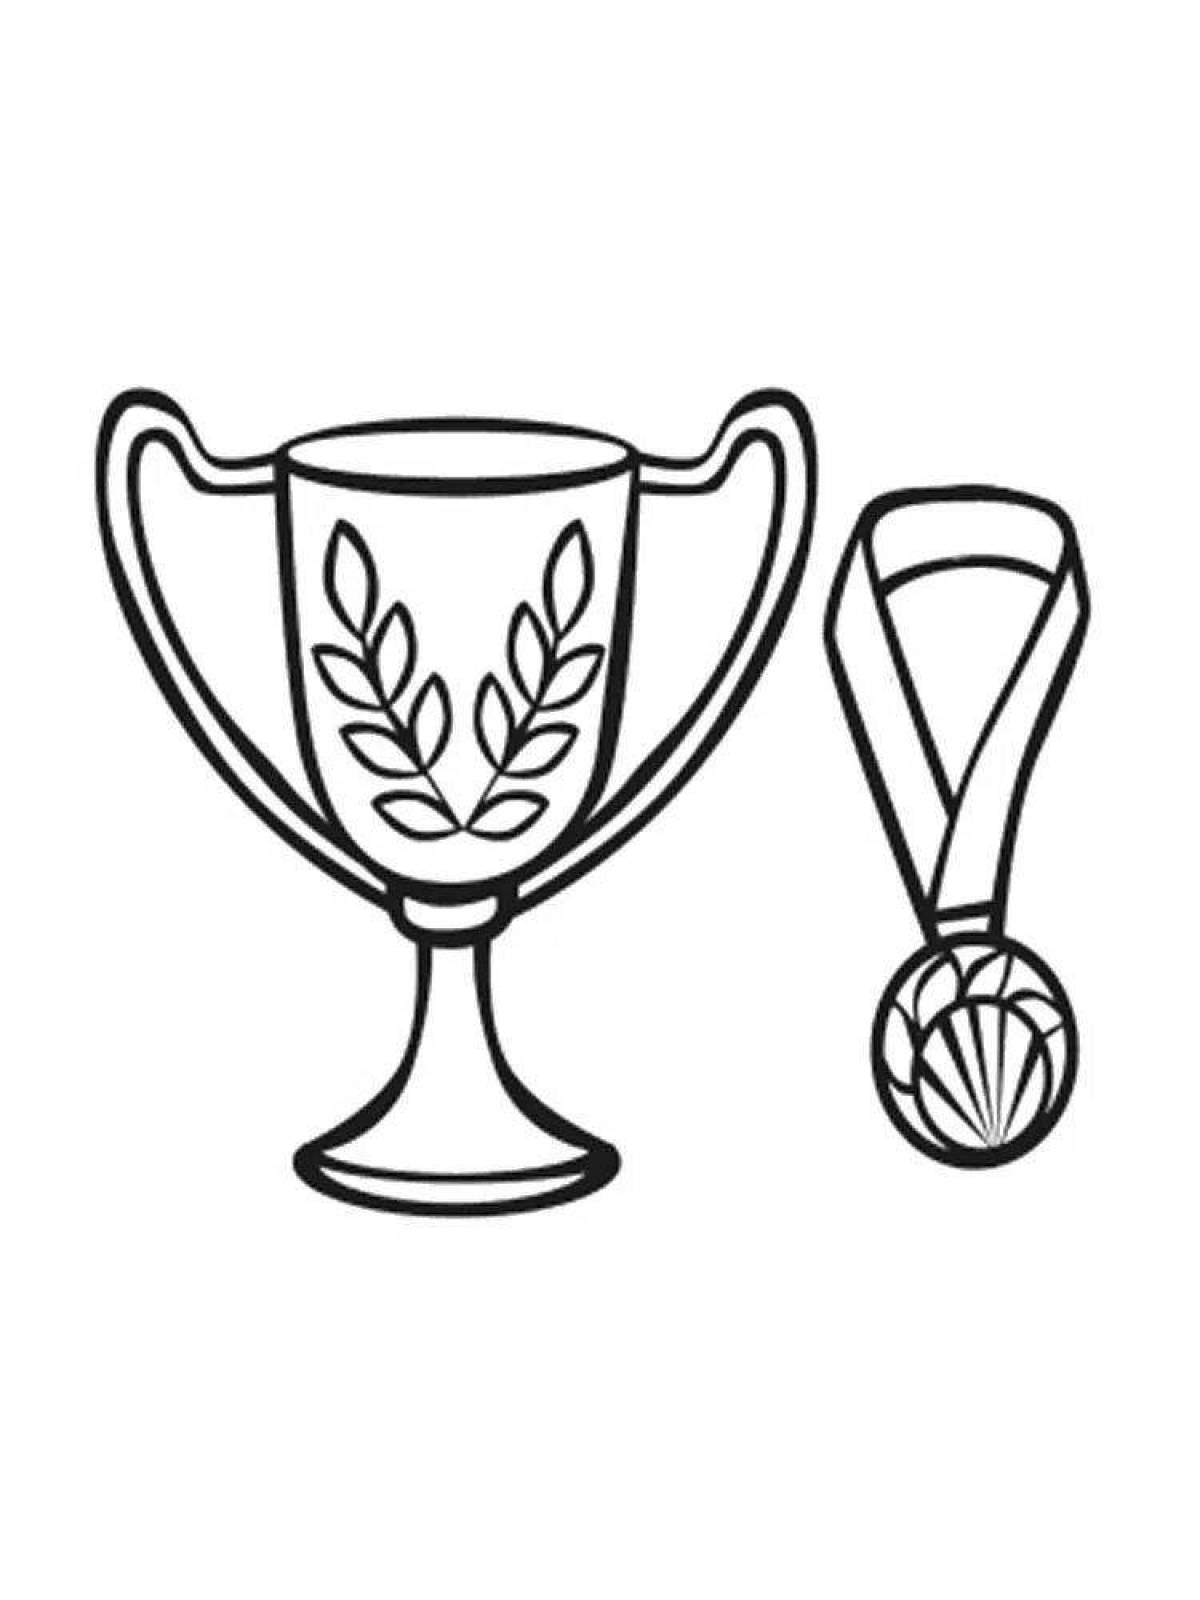 Coloring page impressive winner's cup